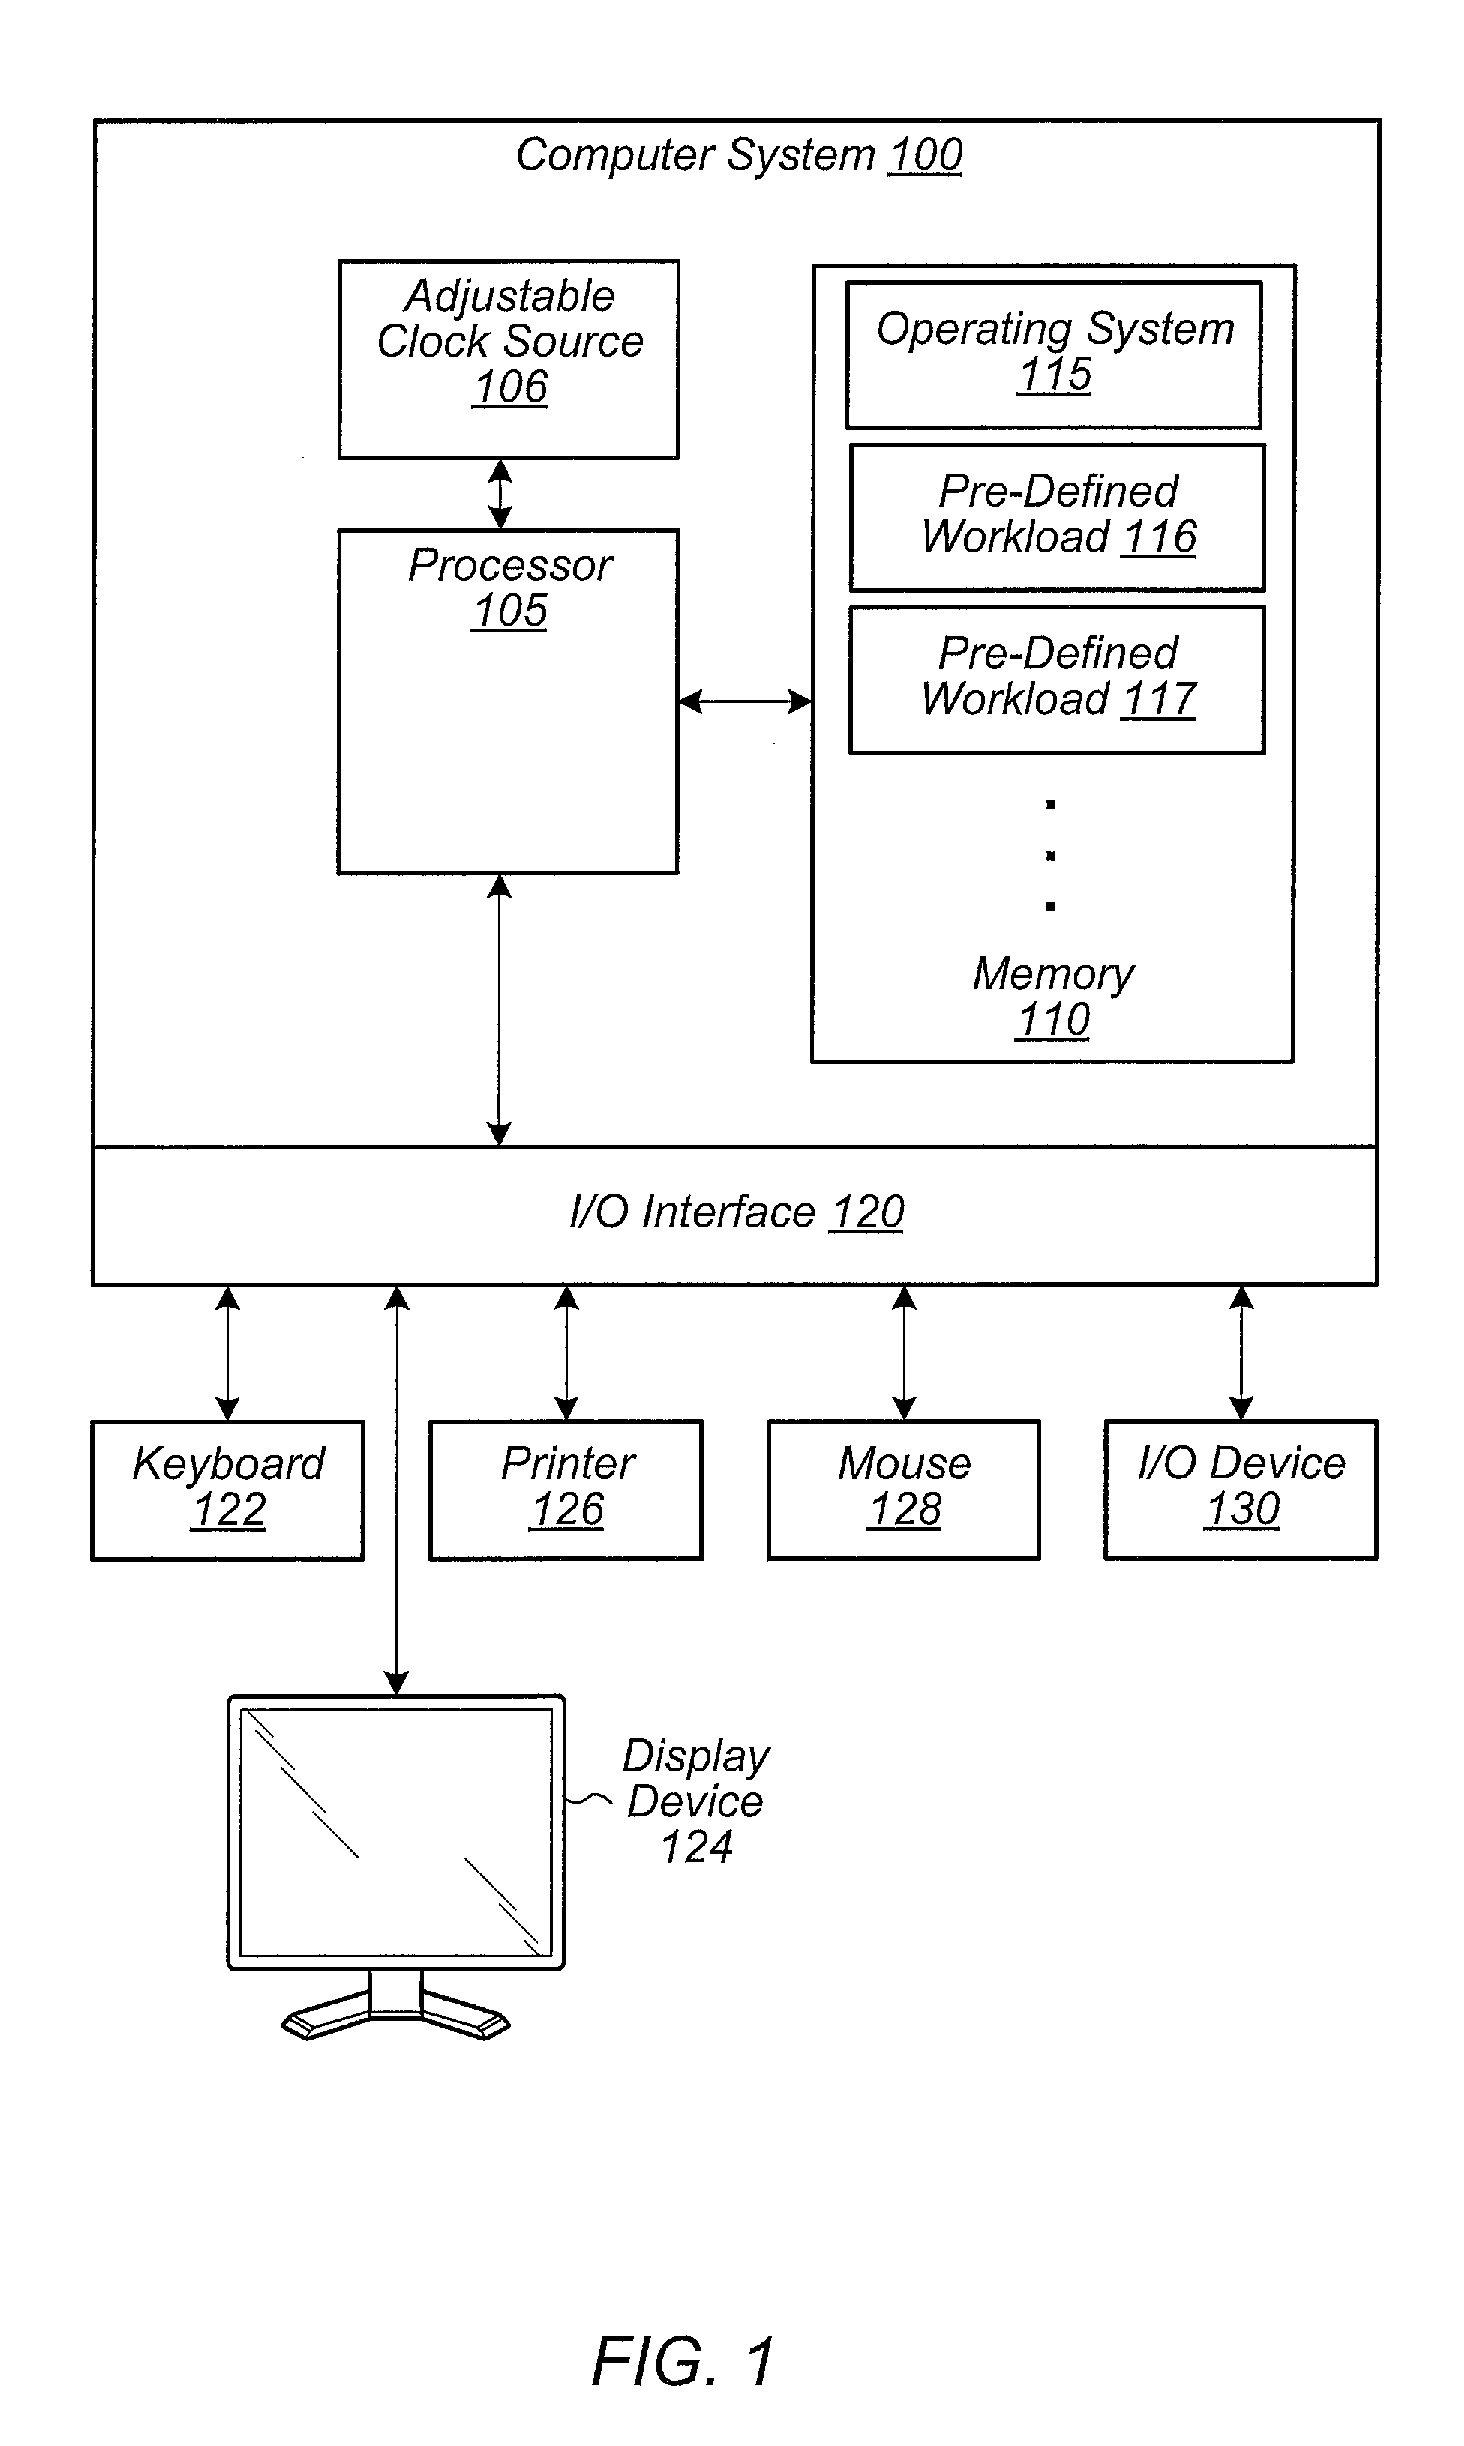 Adjusting the clock frequency of a processing unit in real-time based on a frequency sensitivity value